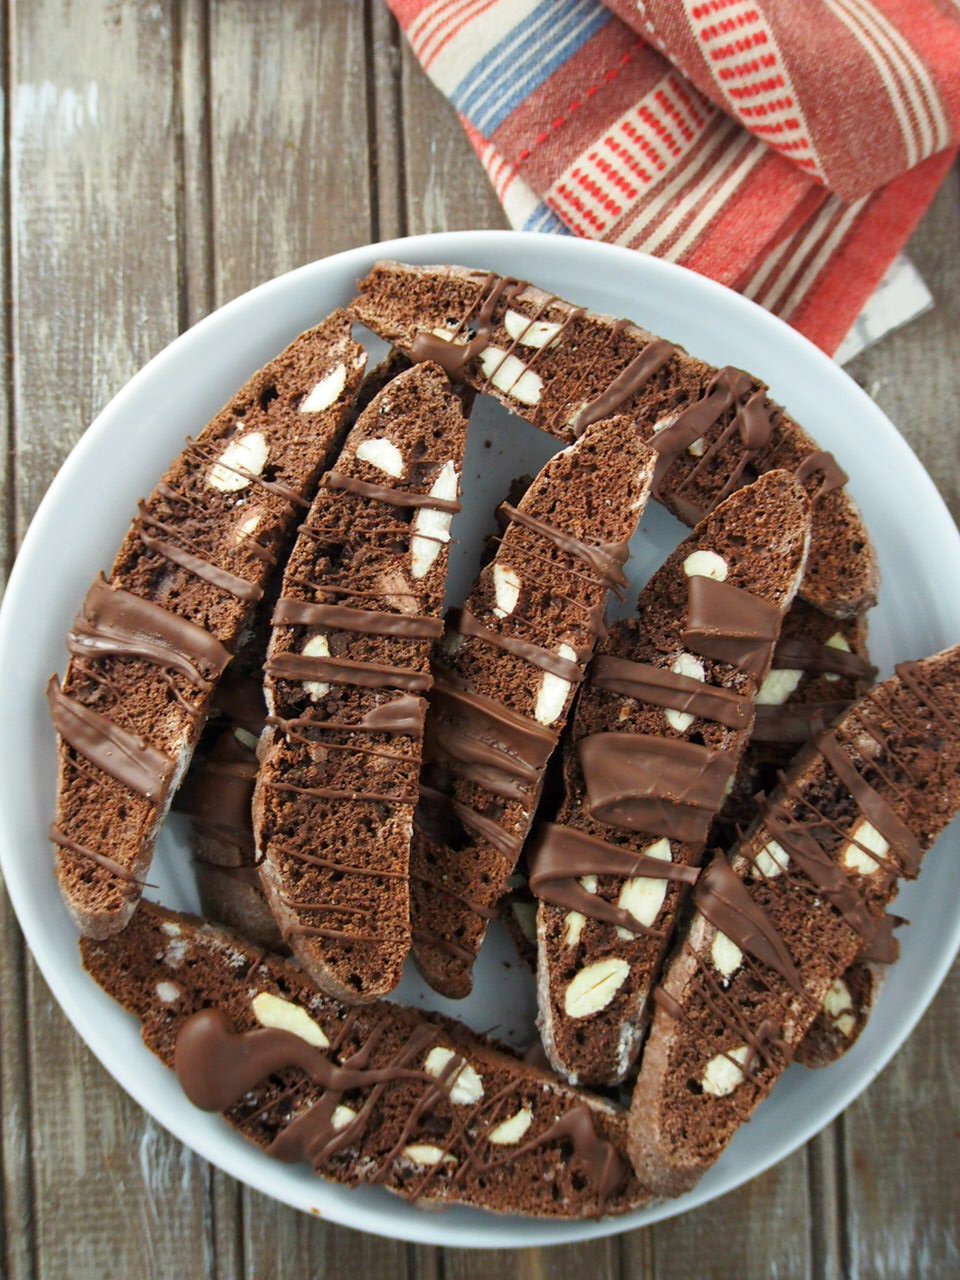 A plate of chocolate biscotti glazed with melted chocolate.